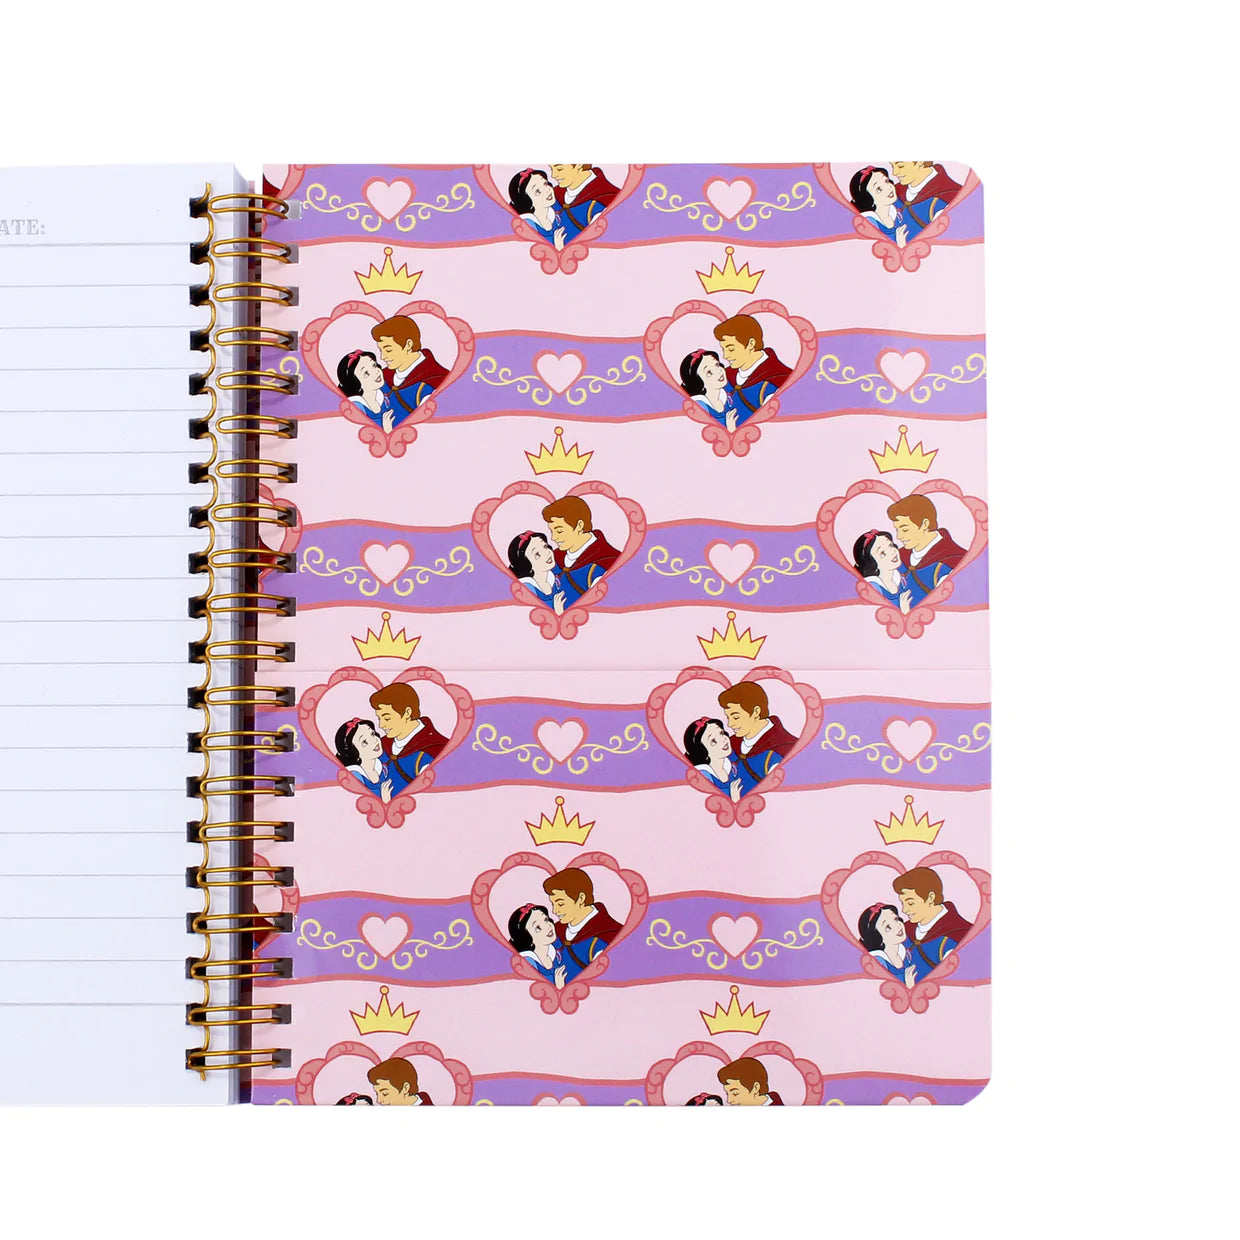 Snow White and Prince Charming (Disney) 90's Style Retro Notebook